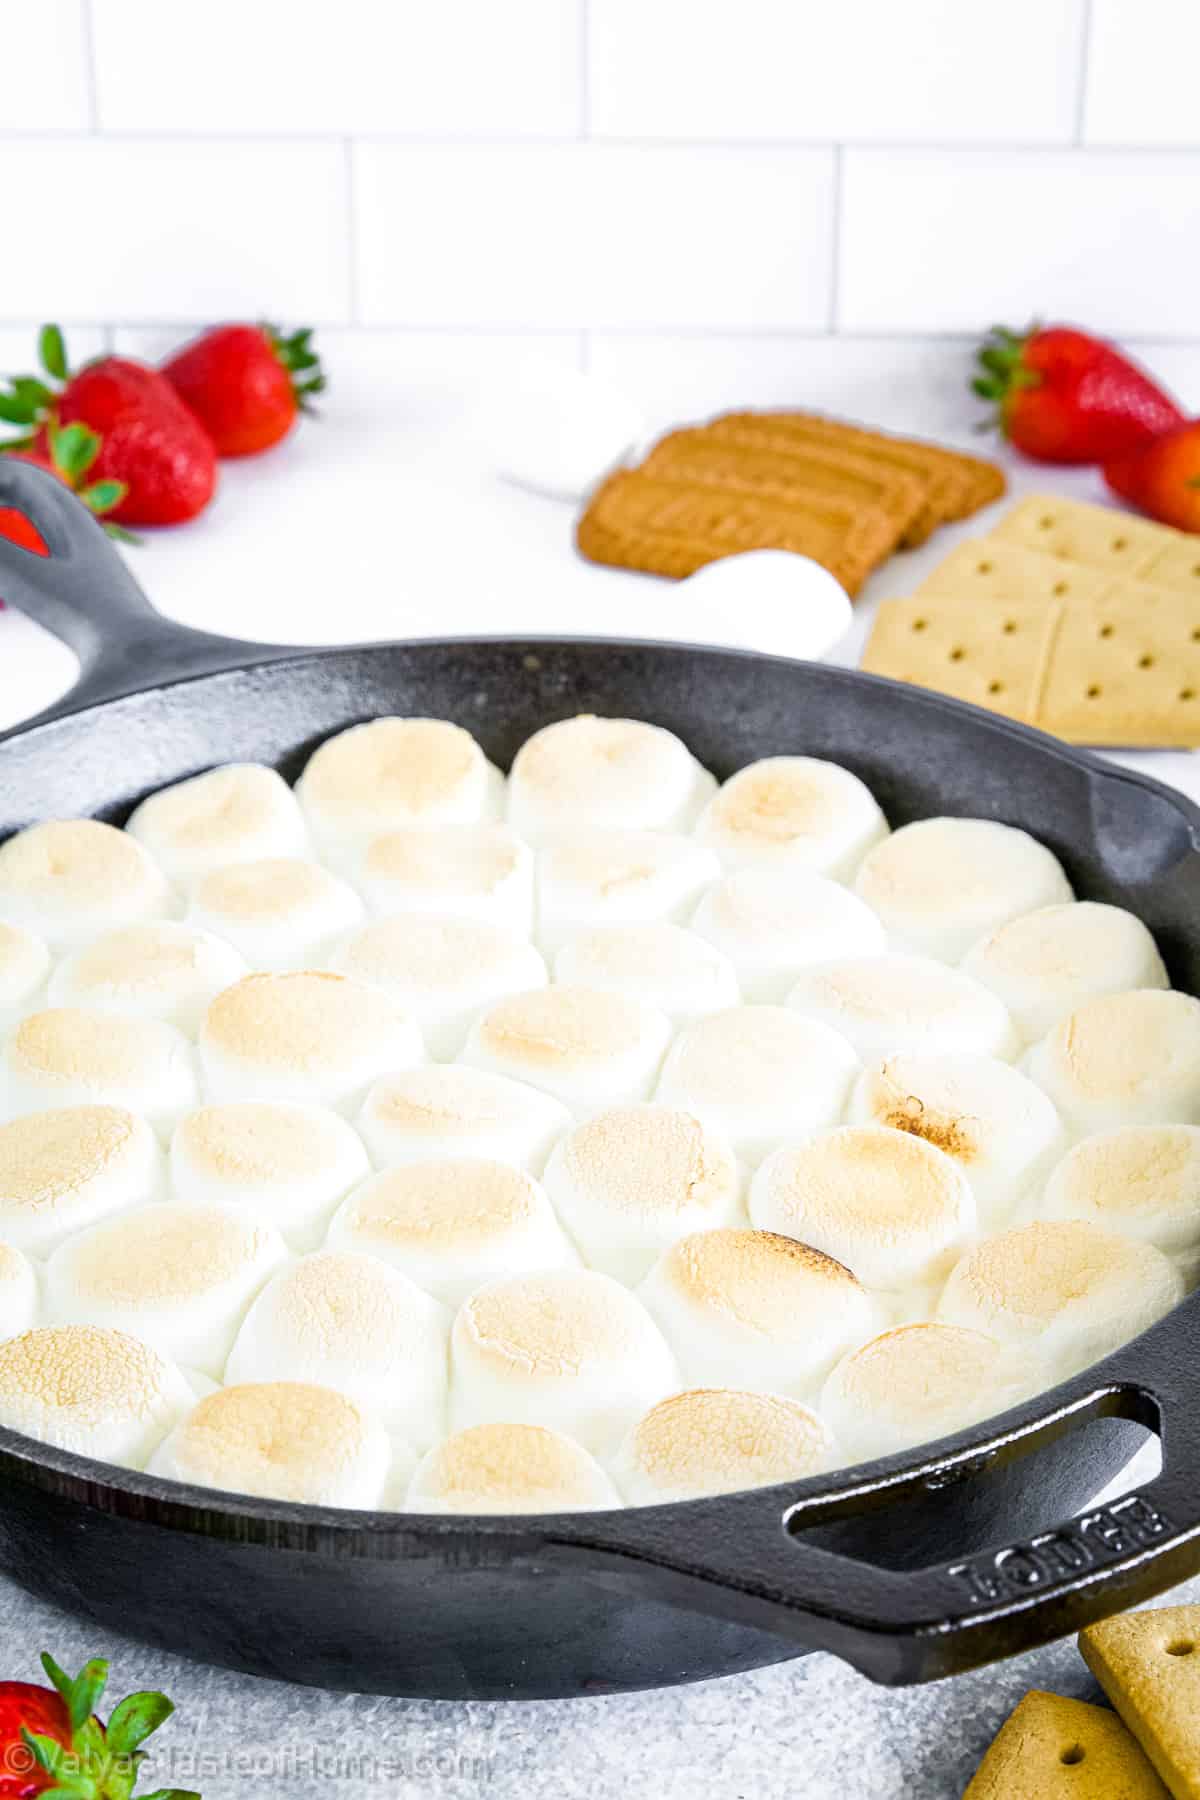 This Smores Dip features an irresistible combination of rich chocolate, gooey marshmallows, and the satisfying crunch of graham crackers.